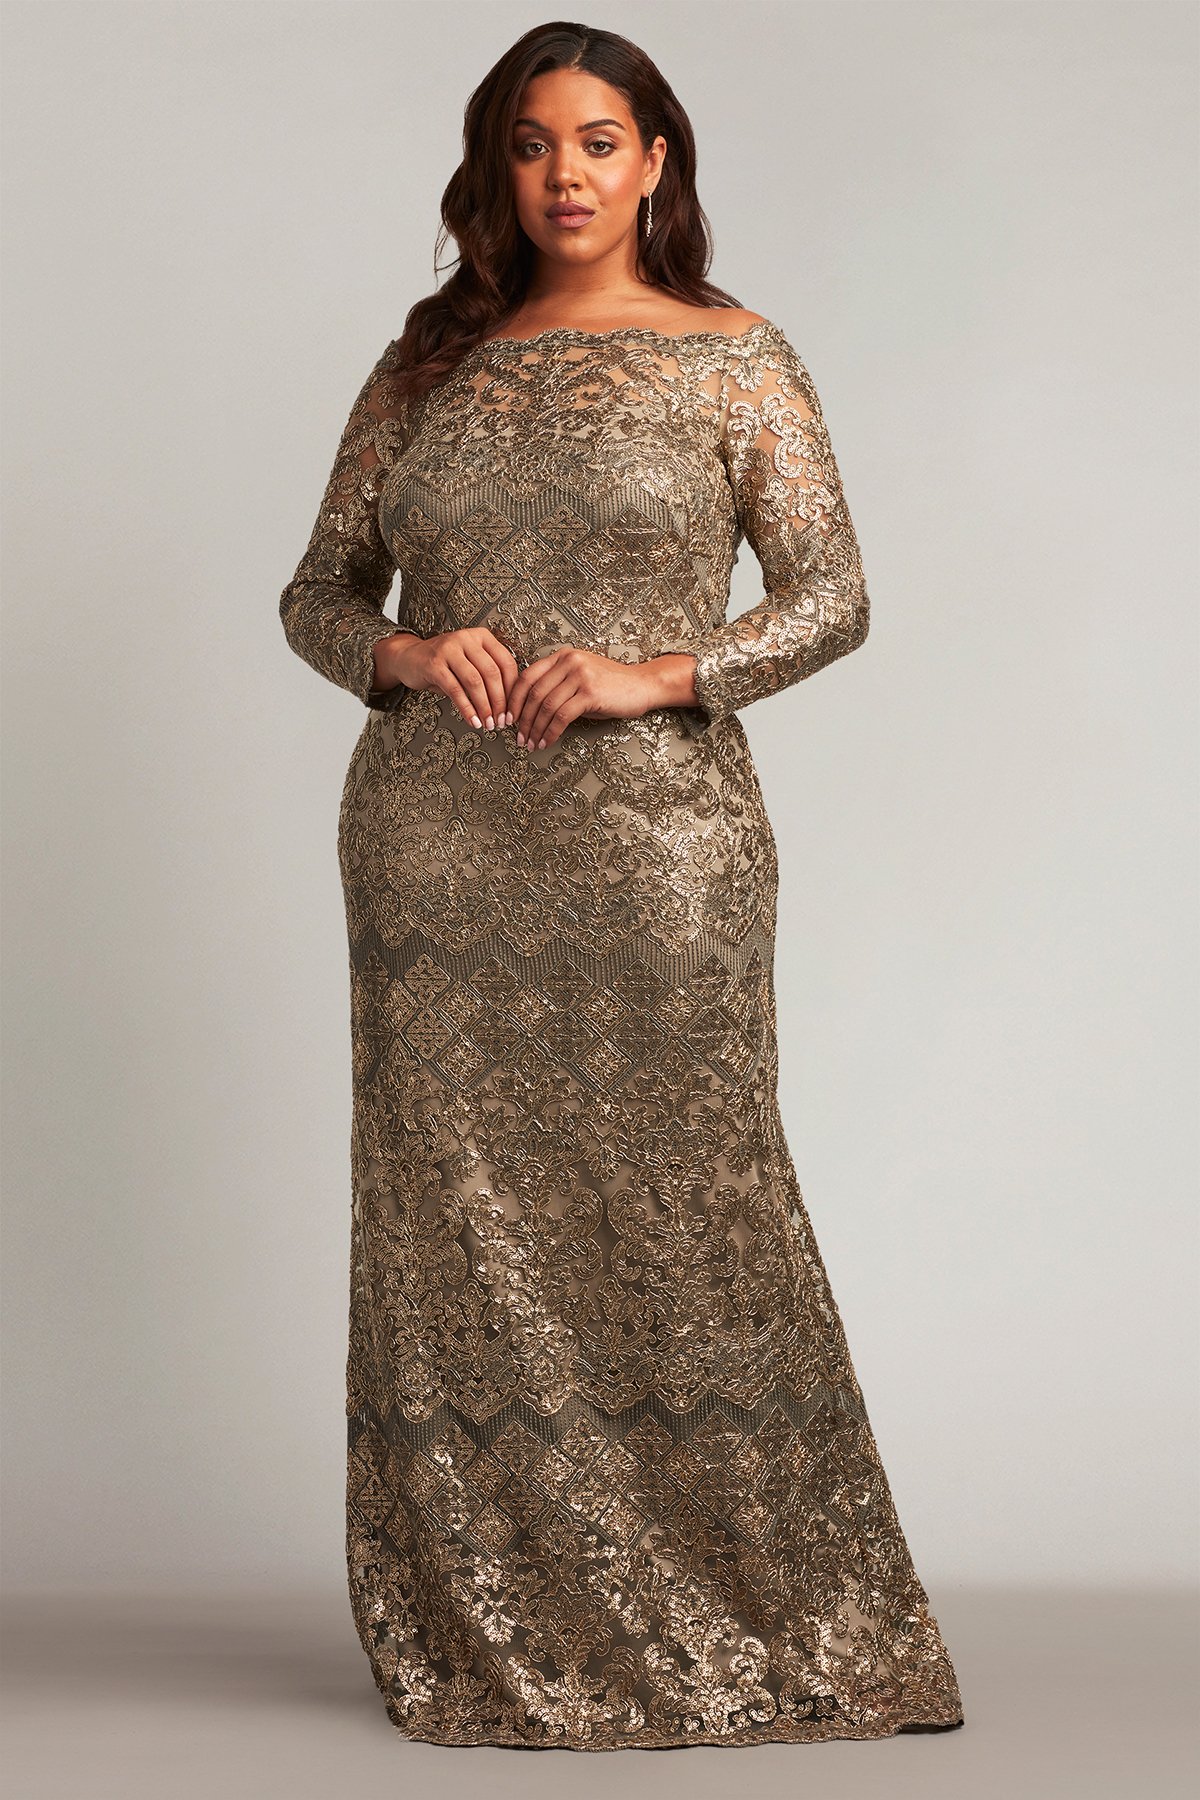 Eve Long-Sleeve Sequin Embroidered Gown - PLUS SIZE SMKPL